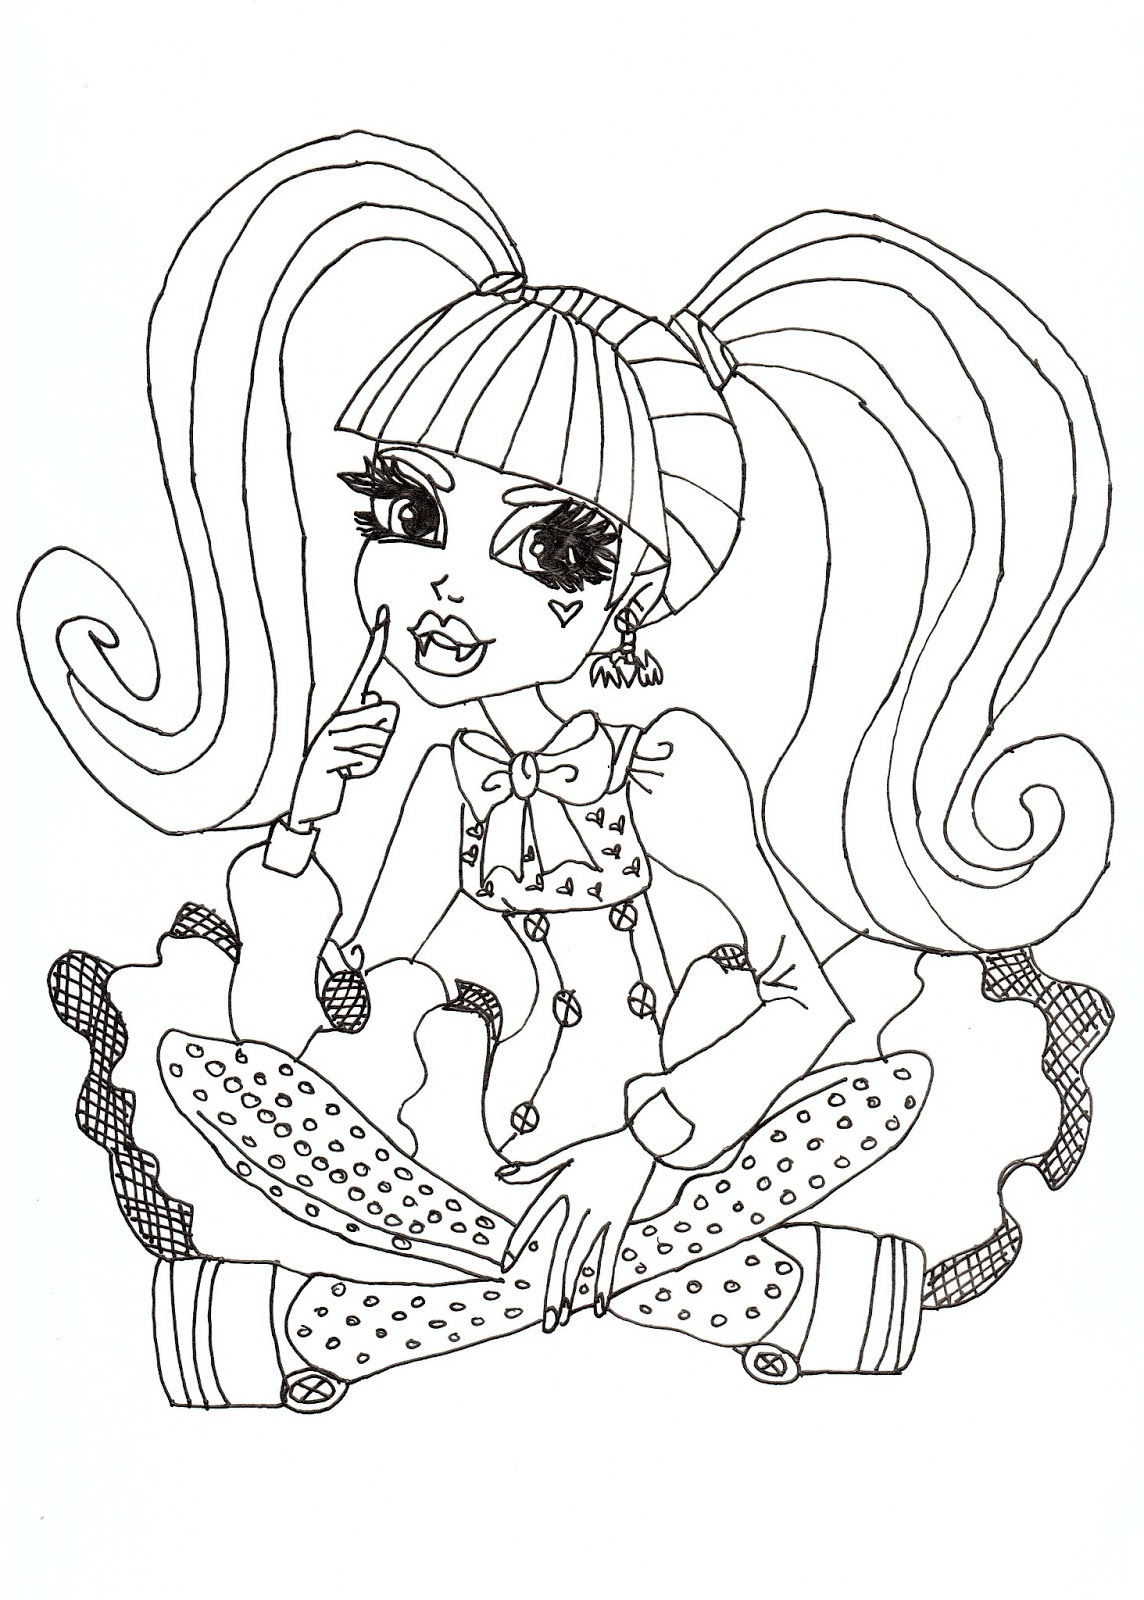  Monster High Coloring Pages | Coloring pages for Girls | Cool coloring page | #12